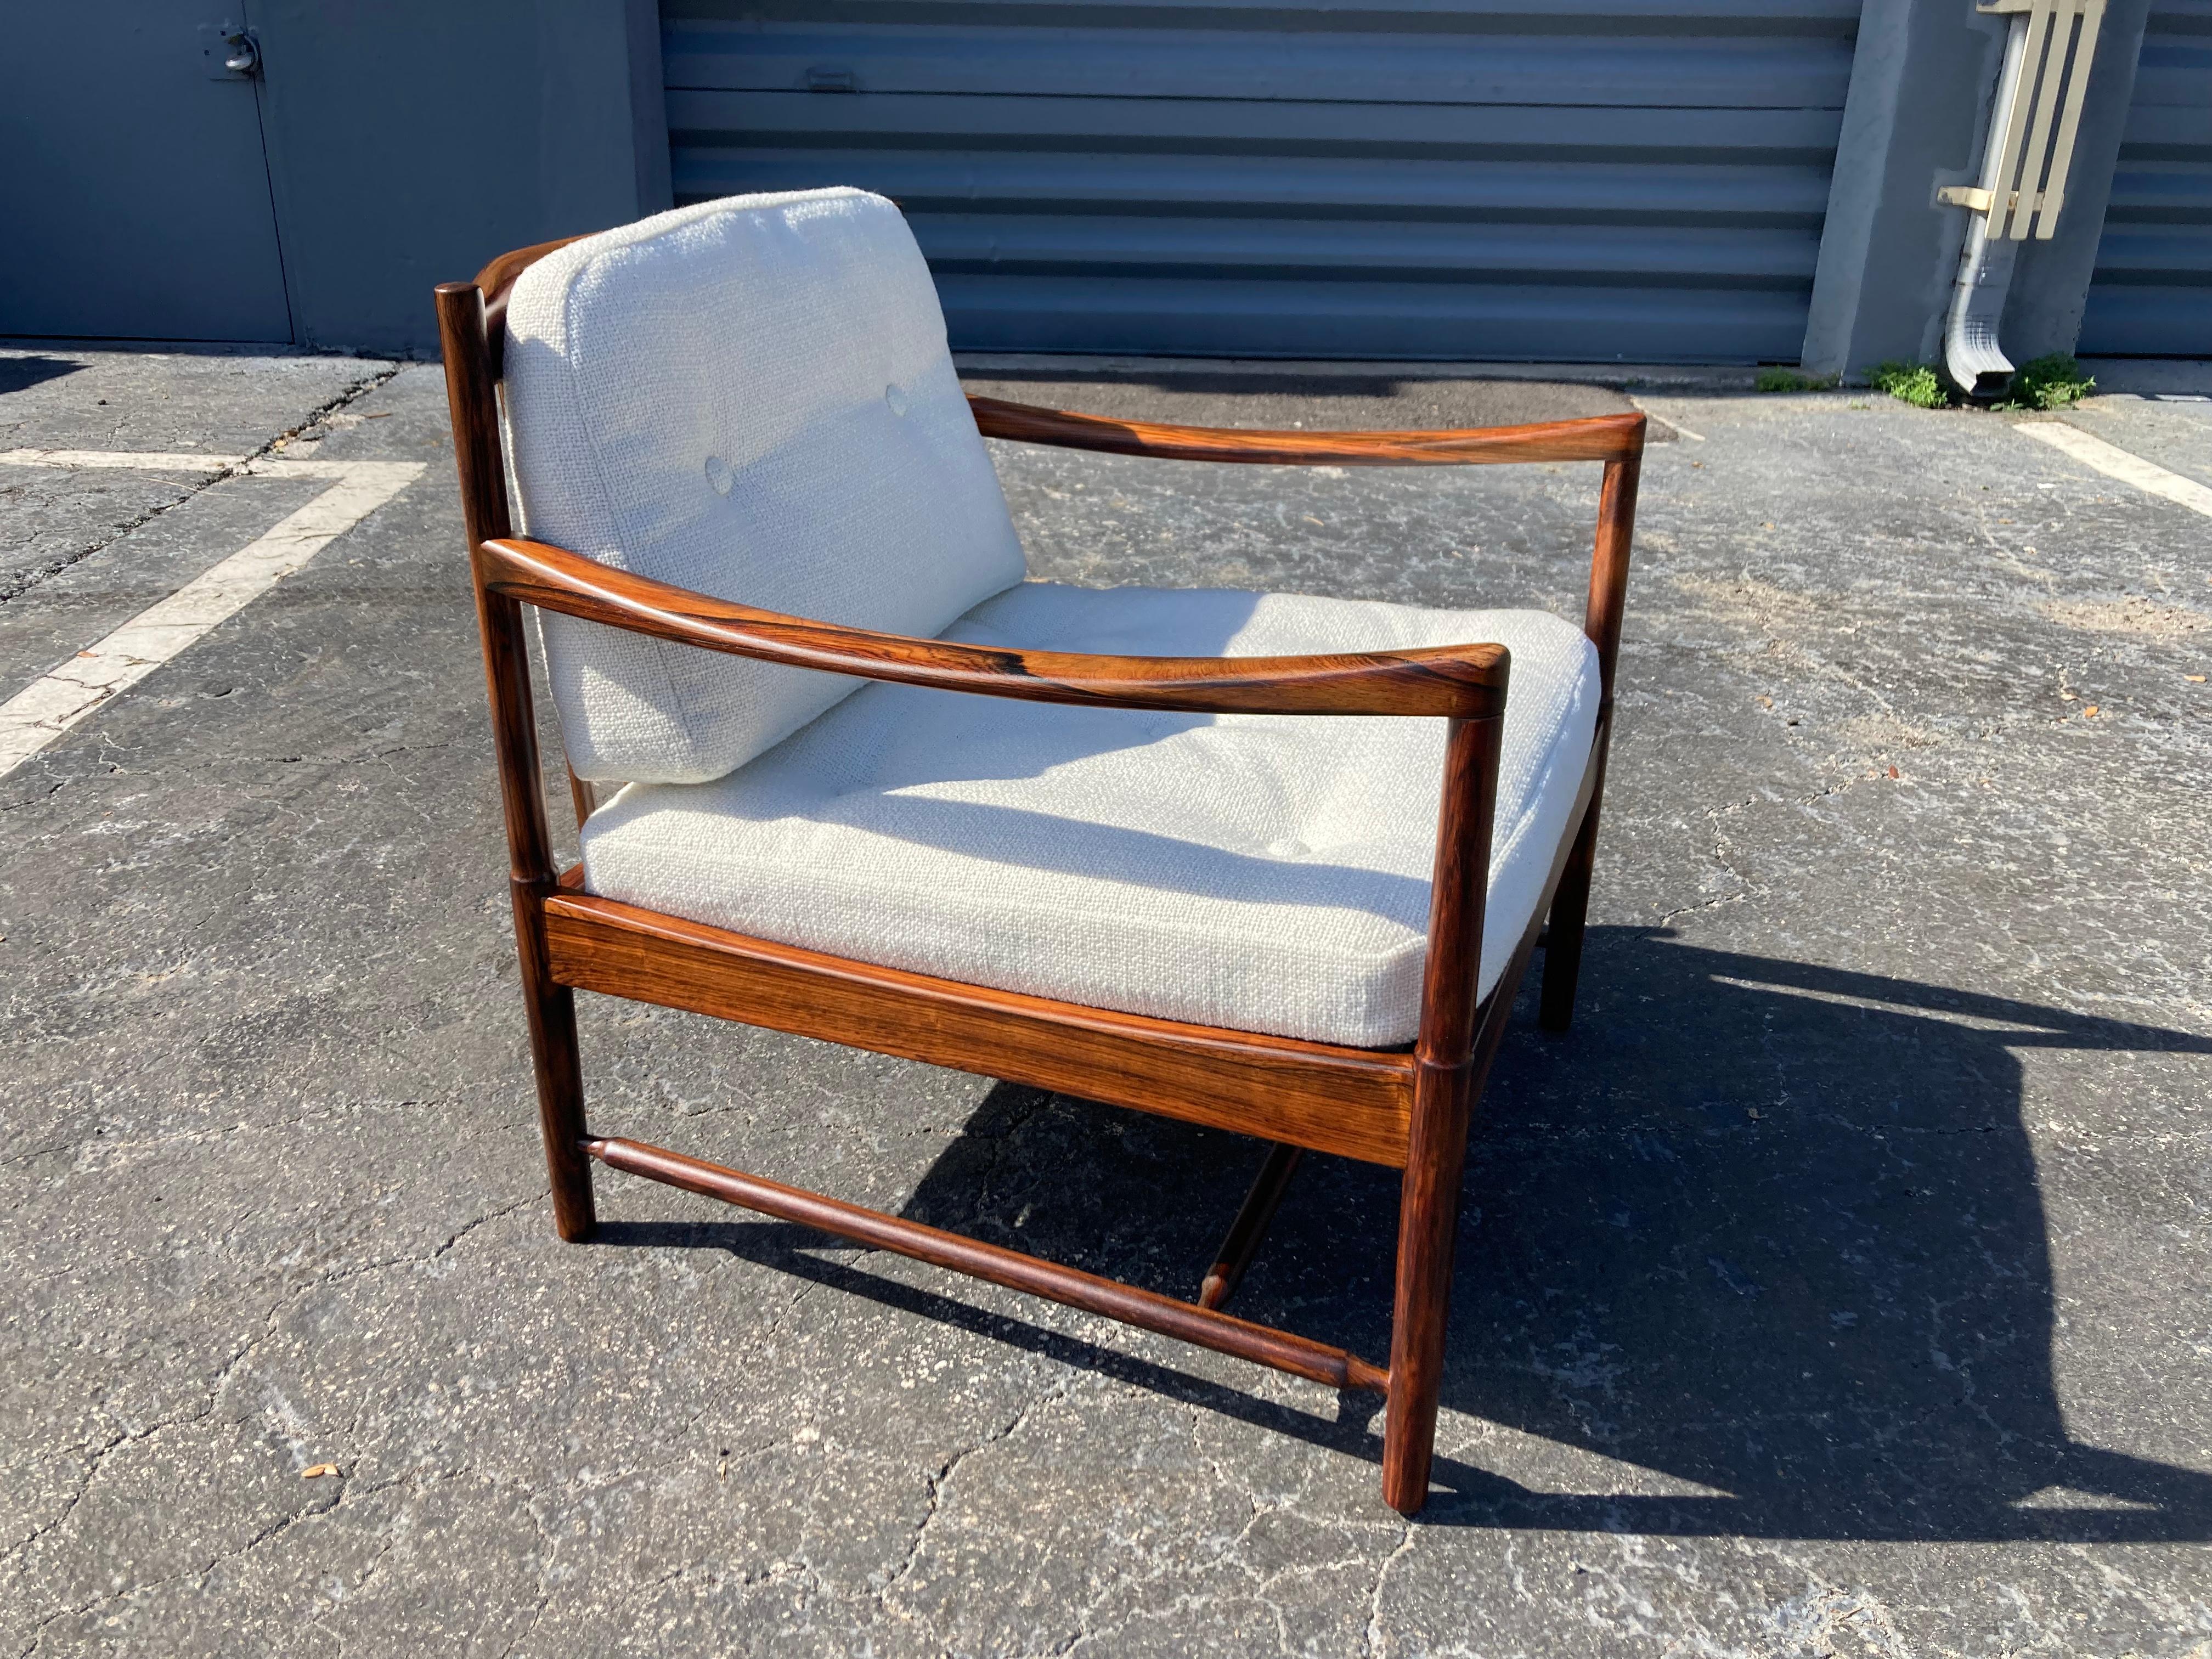 Pair of Rosewood Lounge Chairs Attributed to Kofod Larsen, Danish Modern For Sale 12